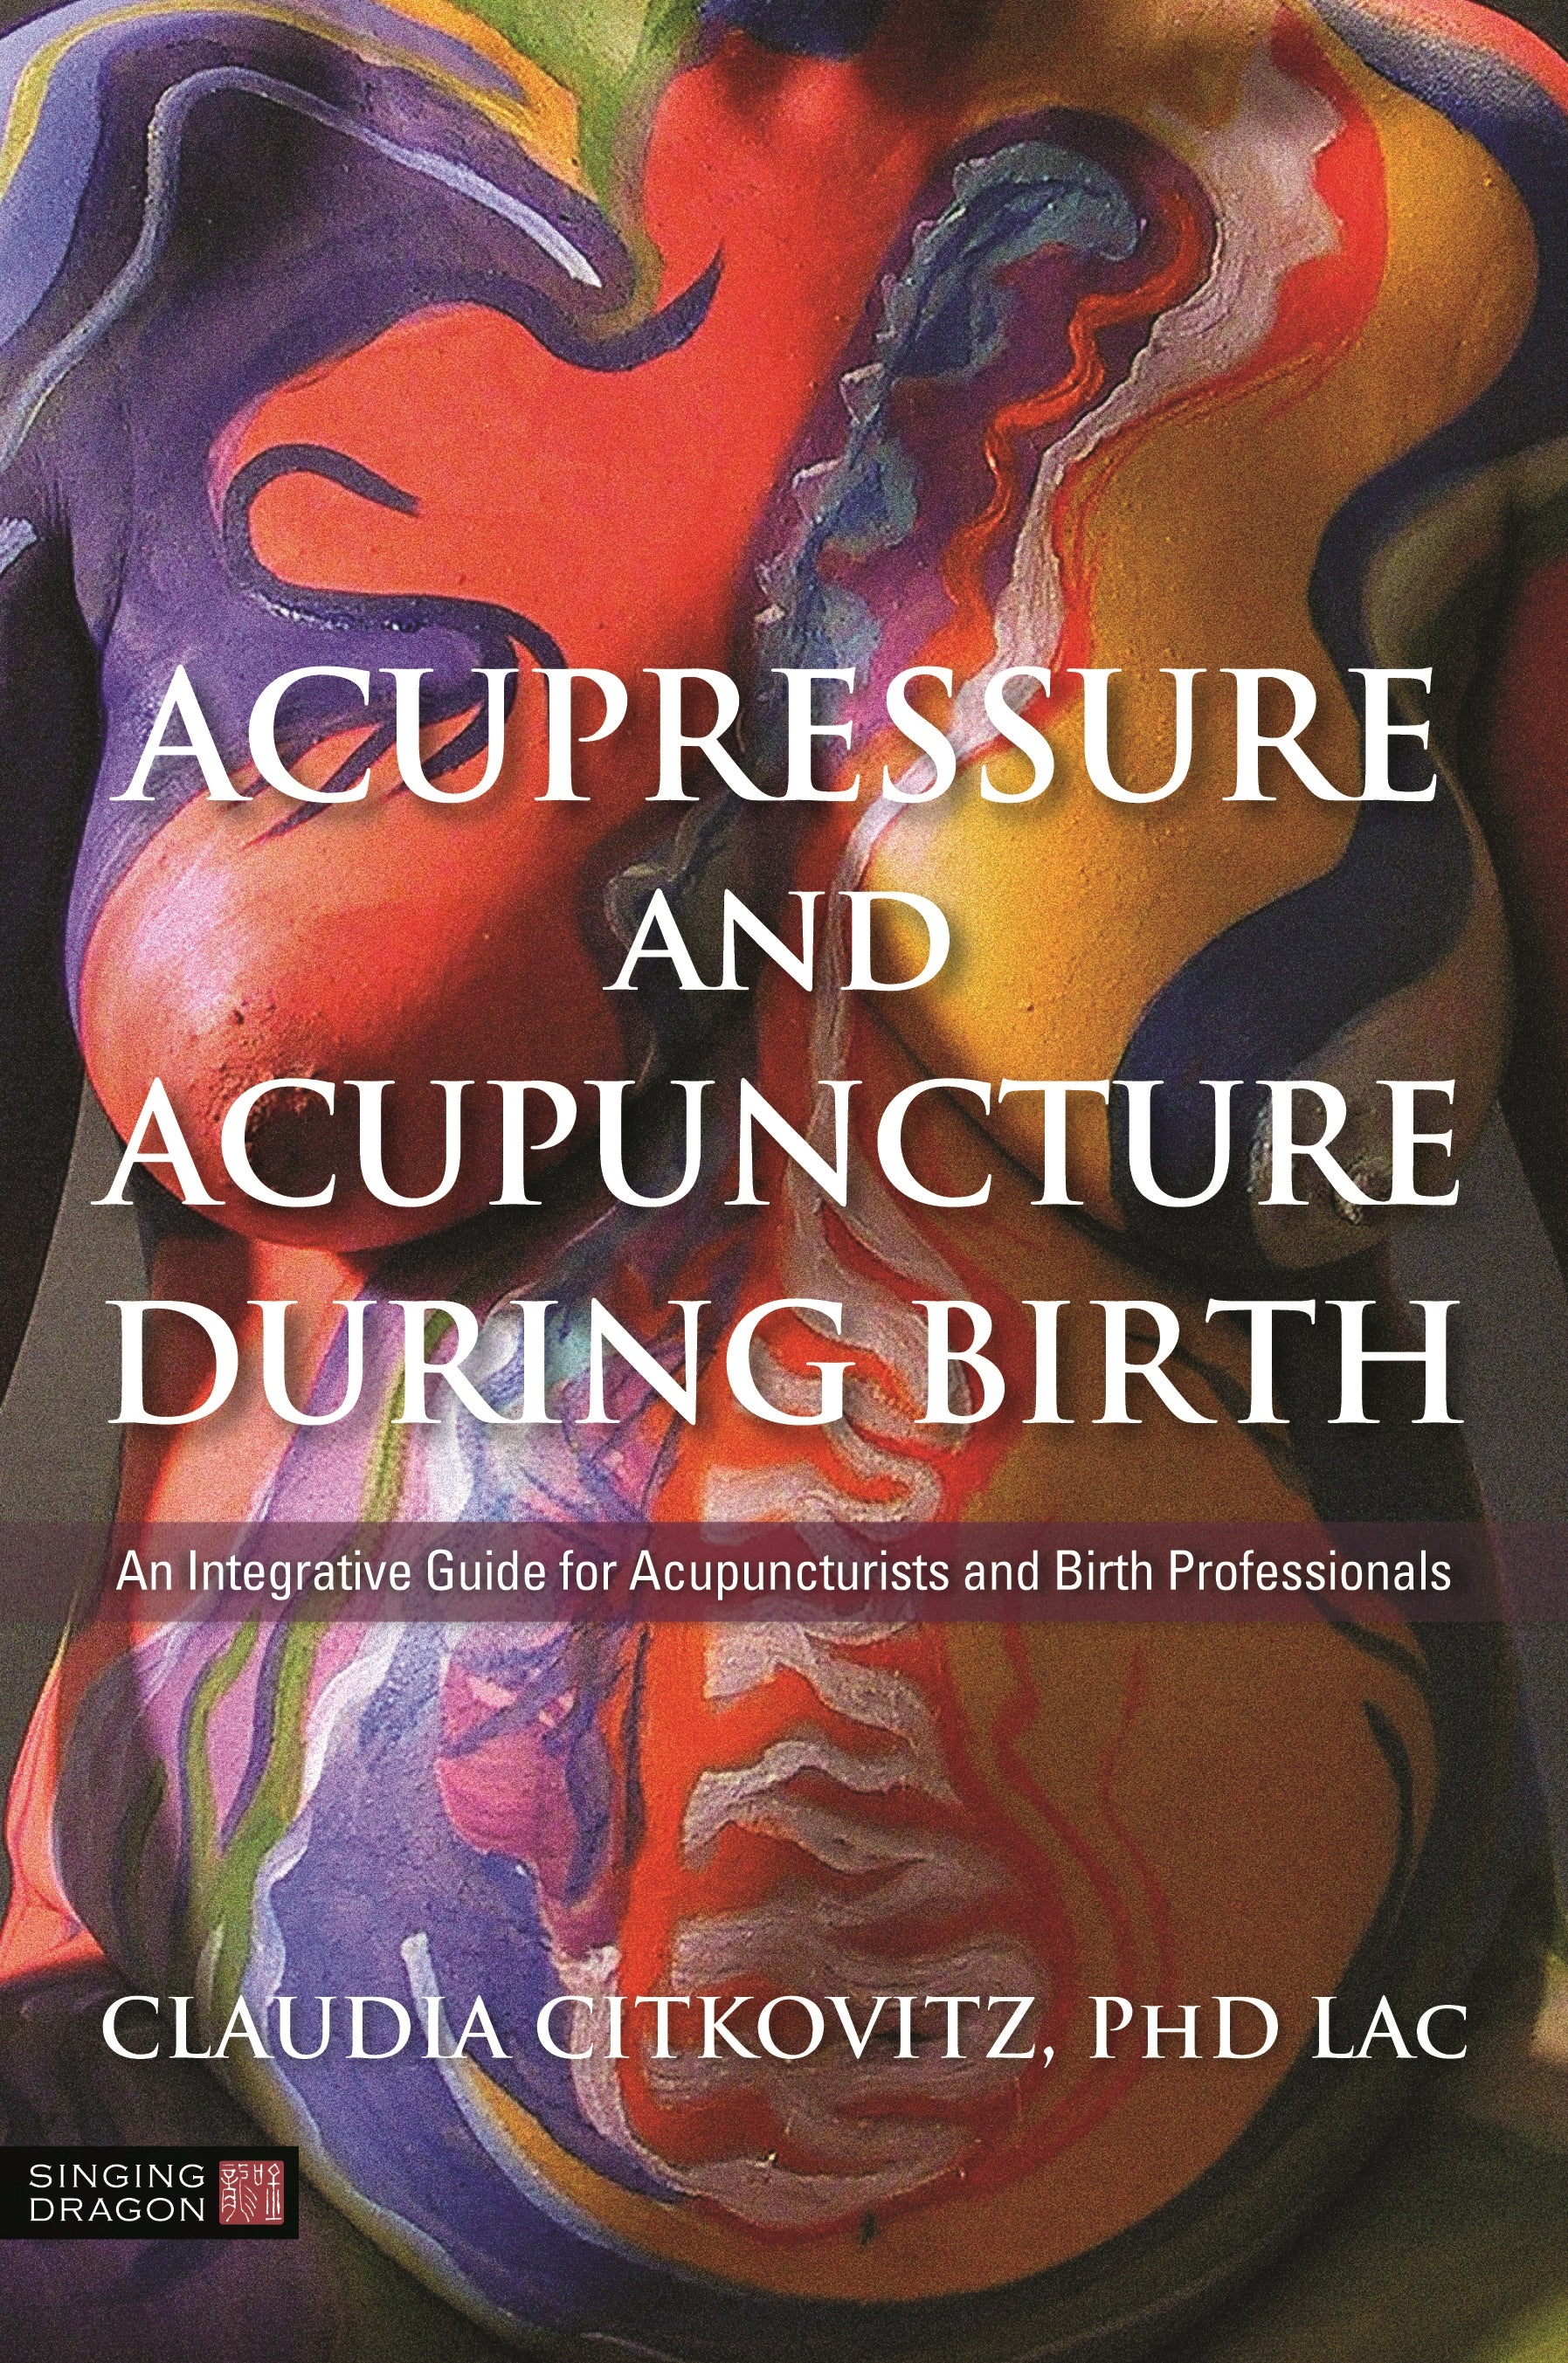 Acupressure and Acupuncture during Birth by Claudia Citkovitz